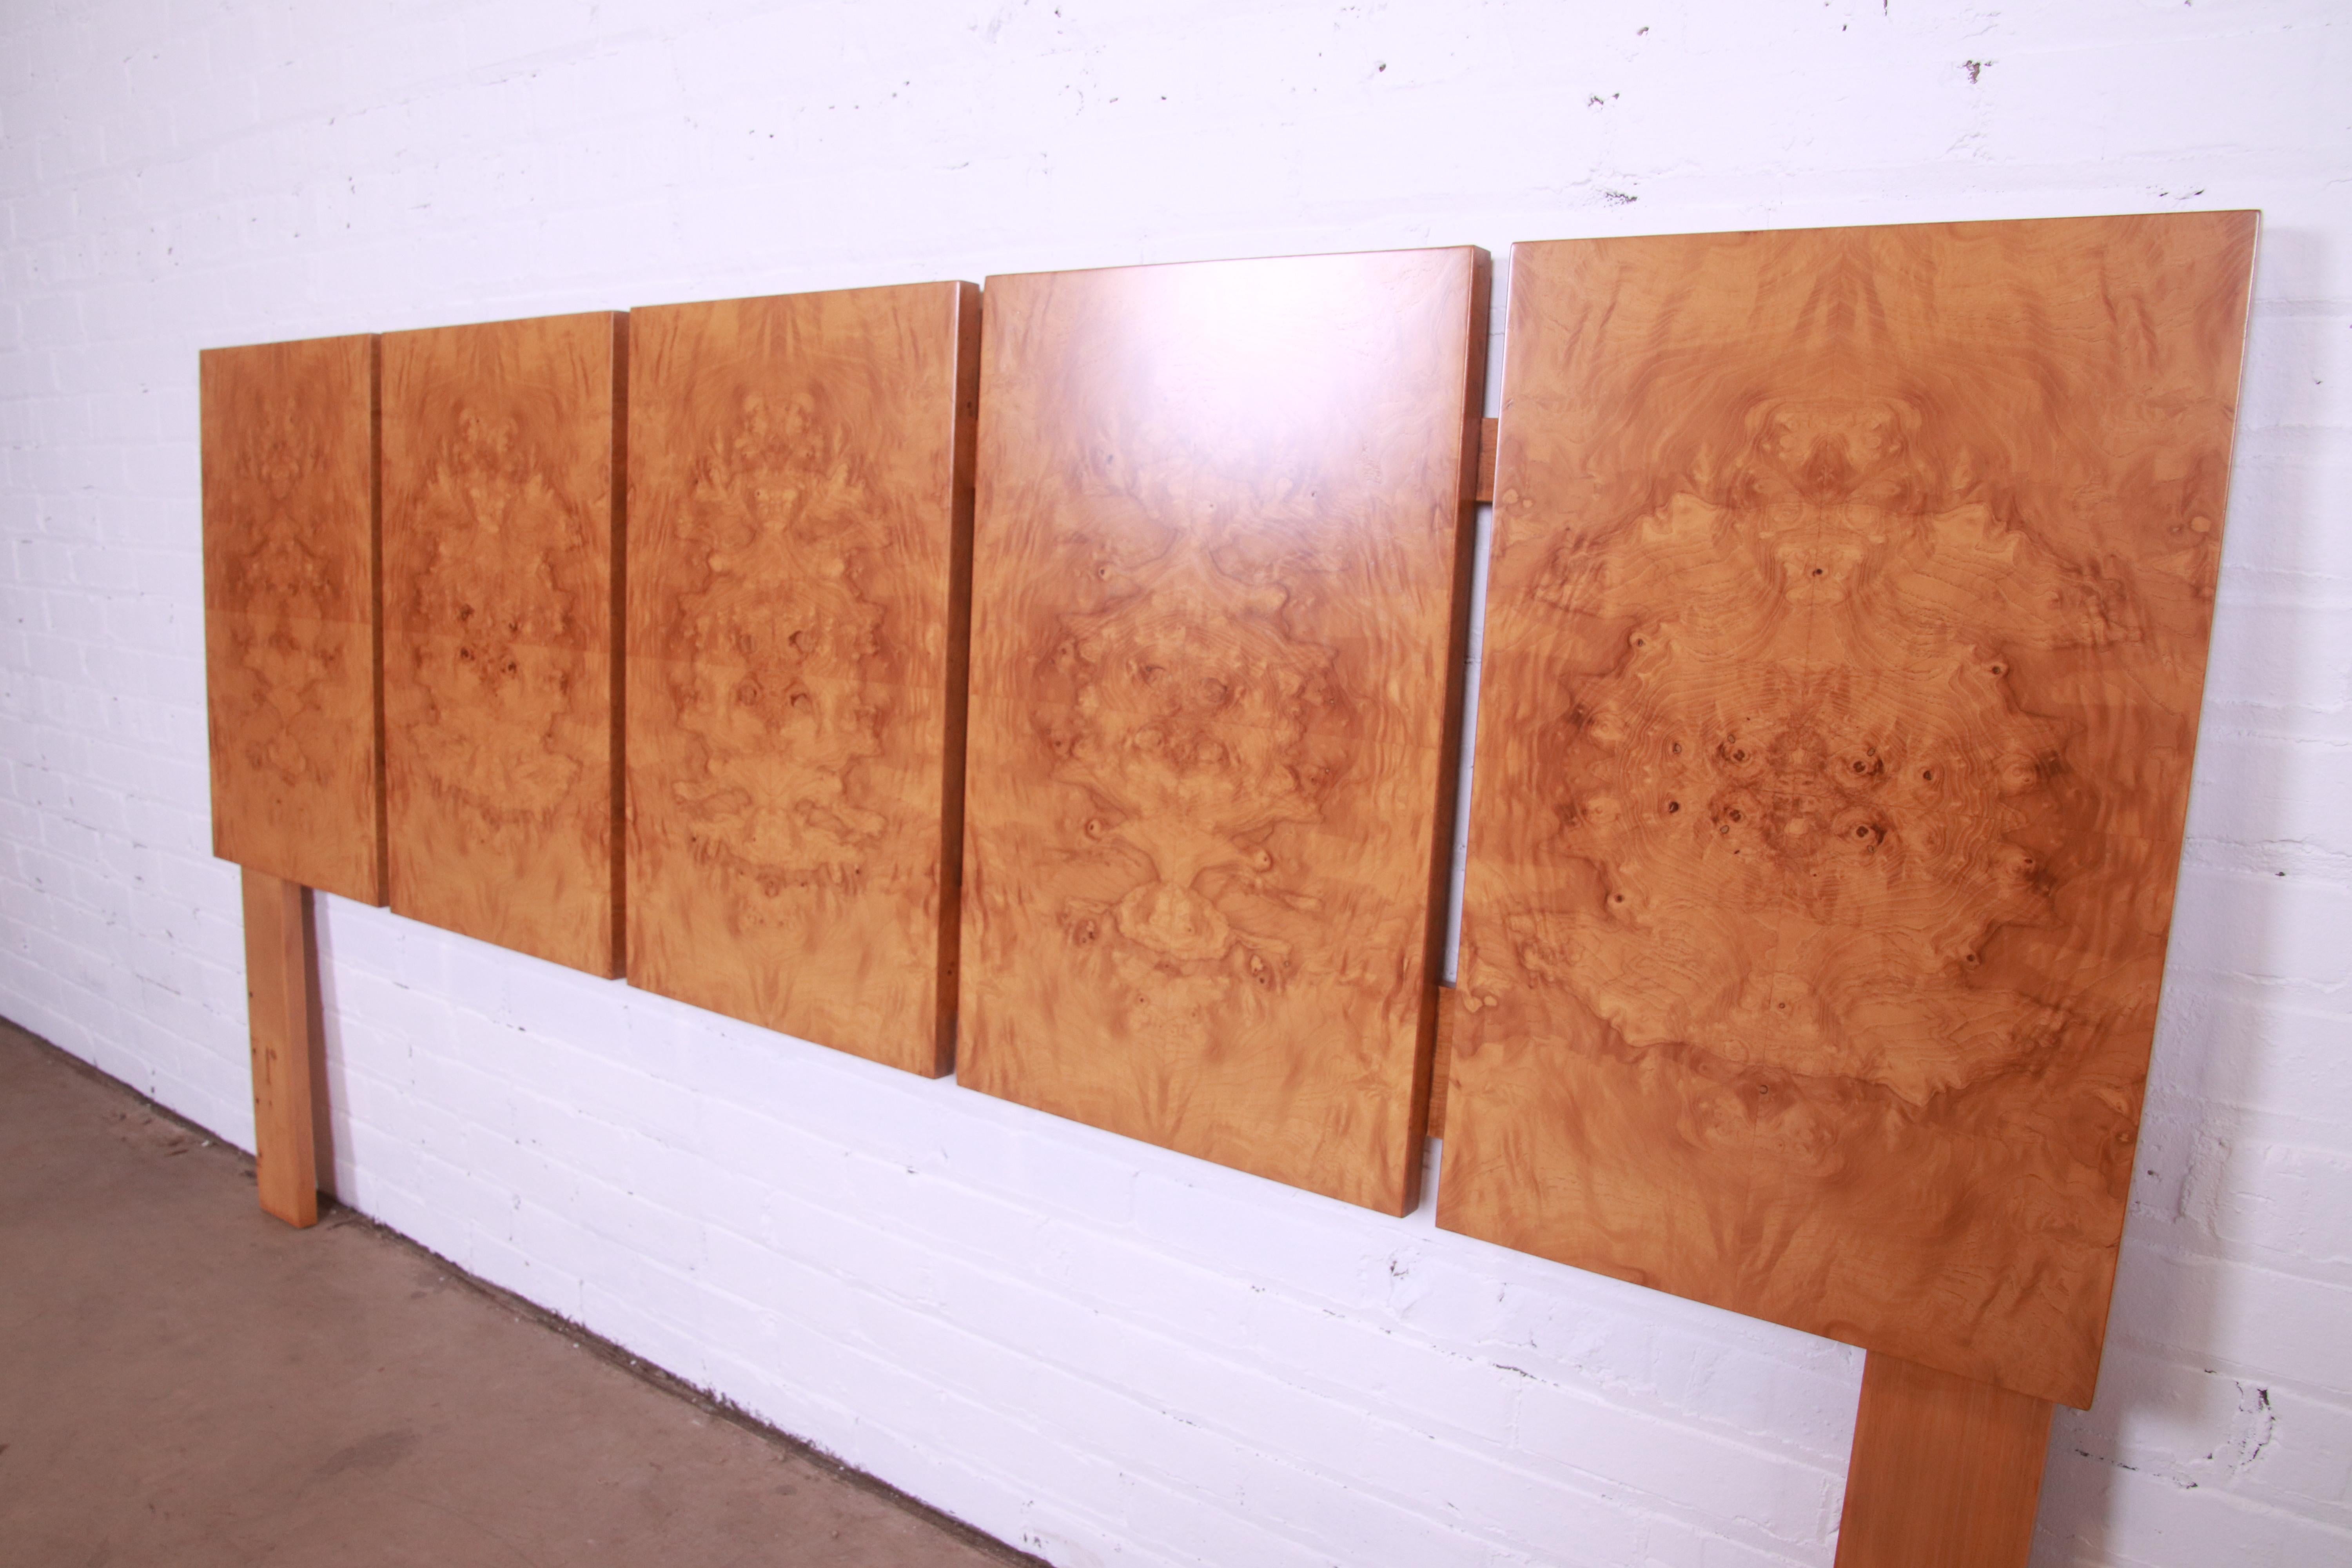 Late 20th Century Mid-Century Modern Burled Olive Wood King Size Headboard by Lane, Refinished